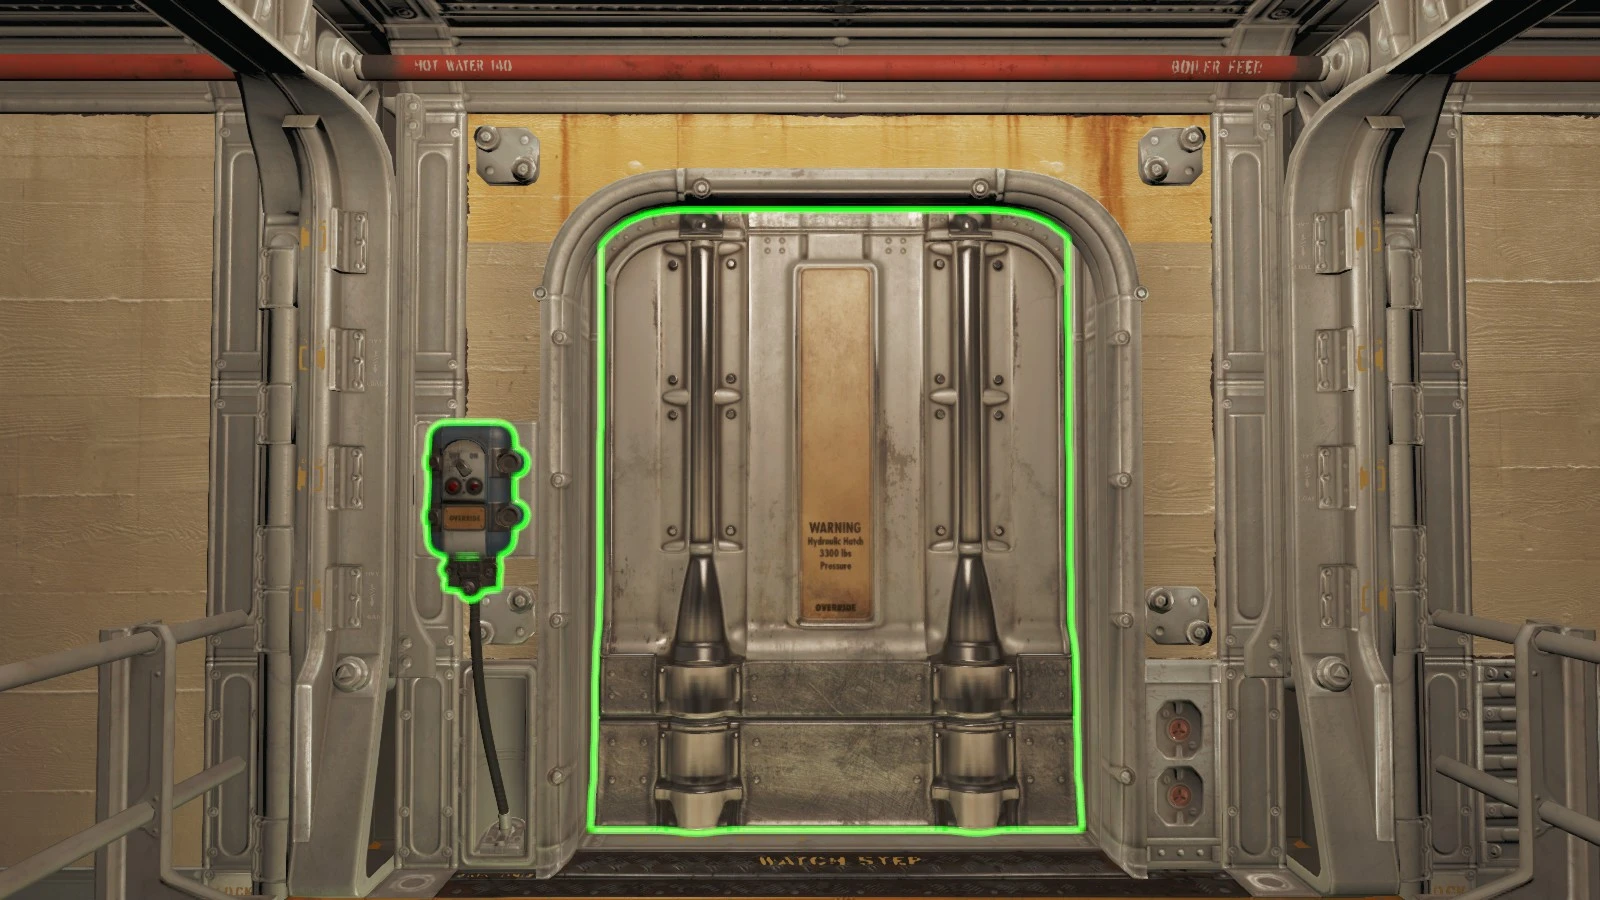 Build your own vault для fallout 4 фото 9